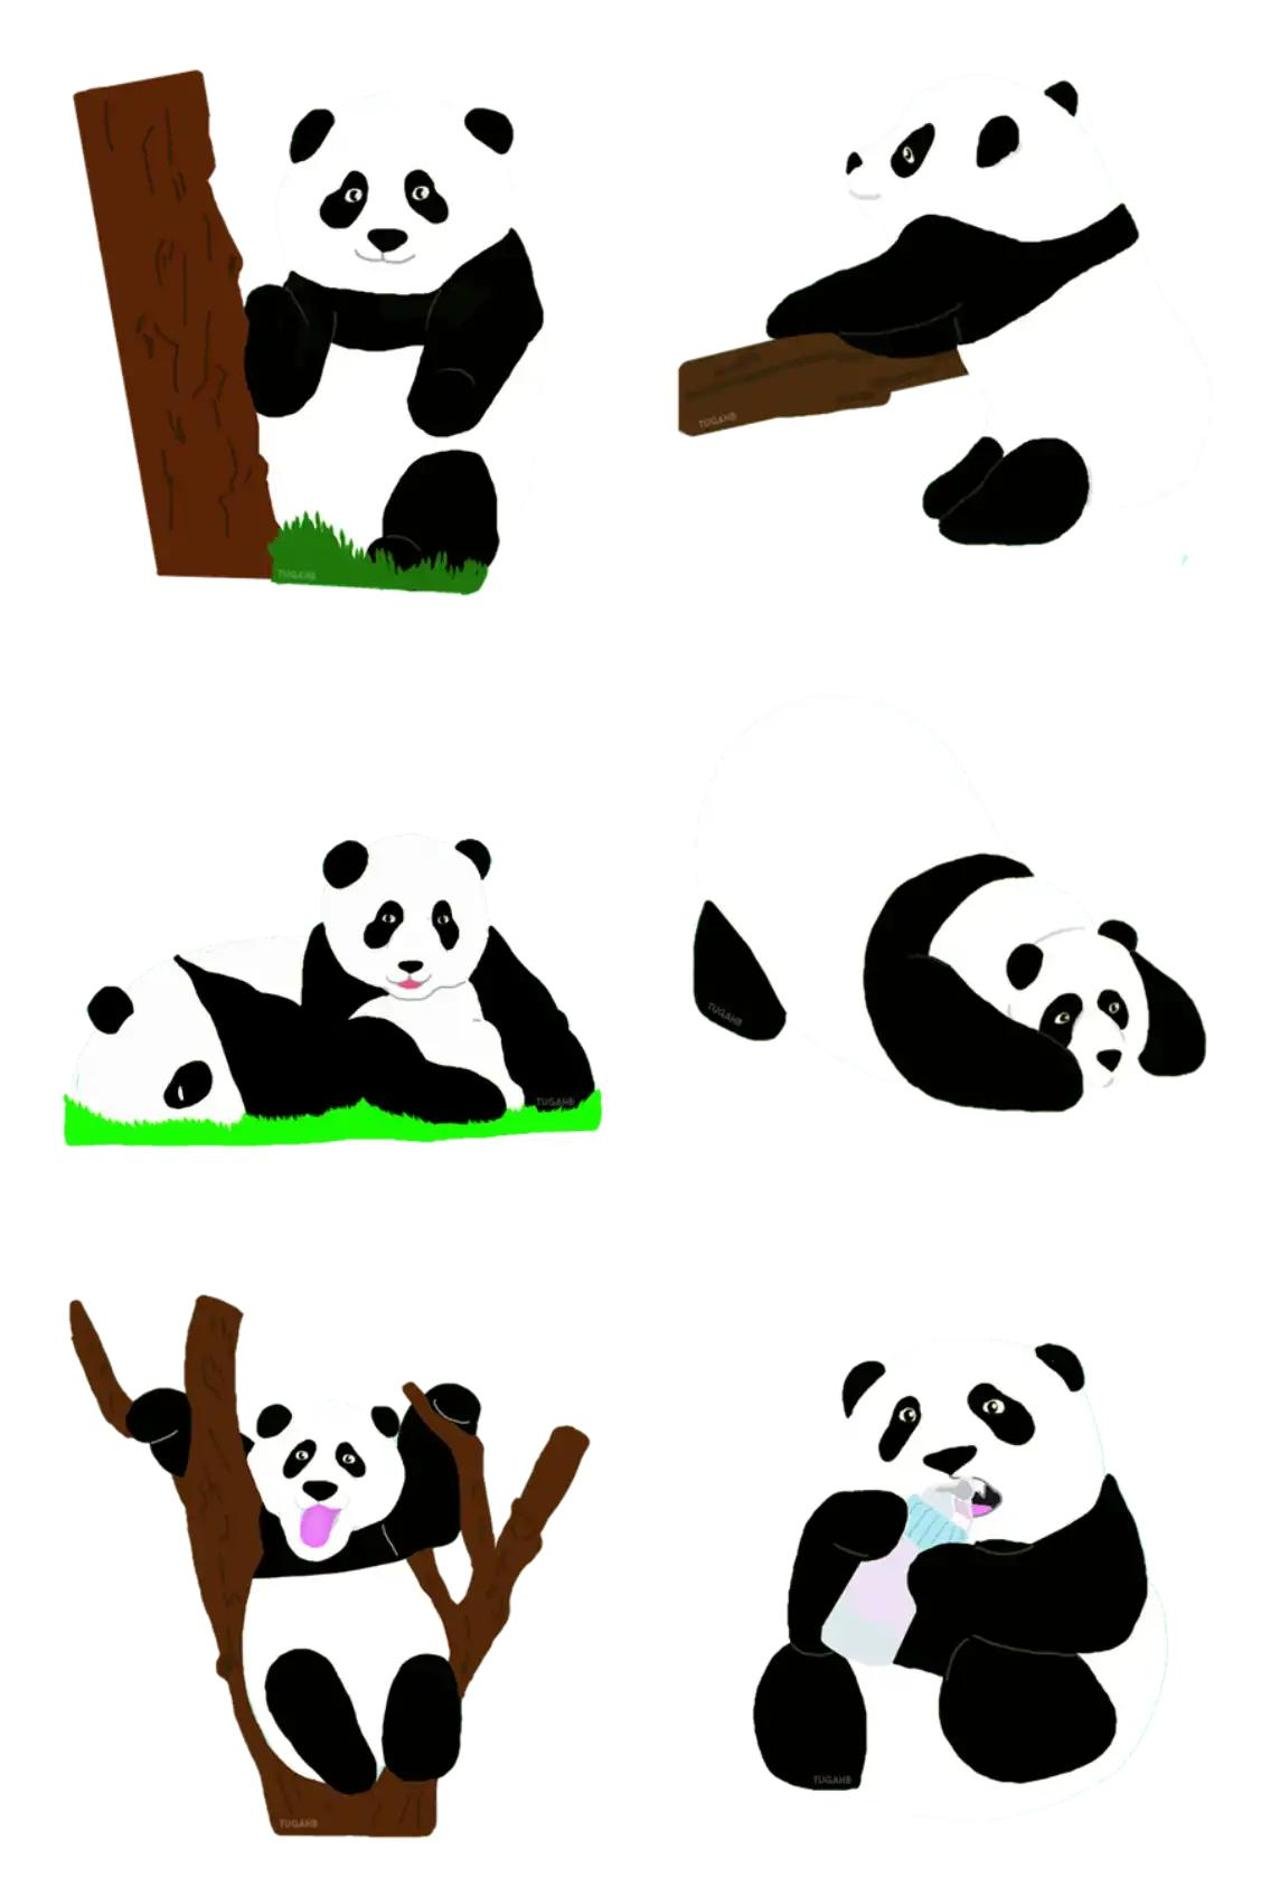 Relaxed pandas Animals sticker pack for Whatsapp, Telegram, Signal, and others chatting and message apps